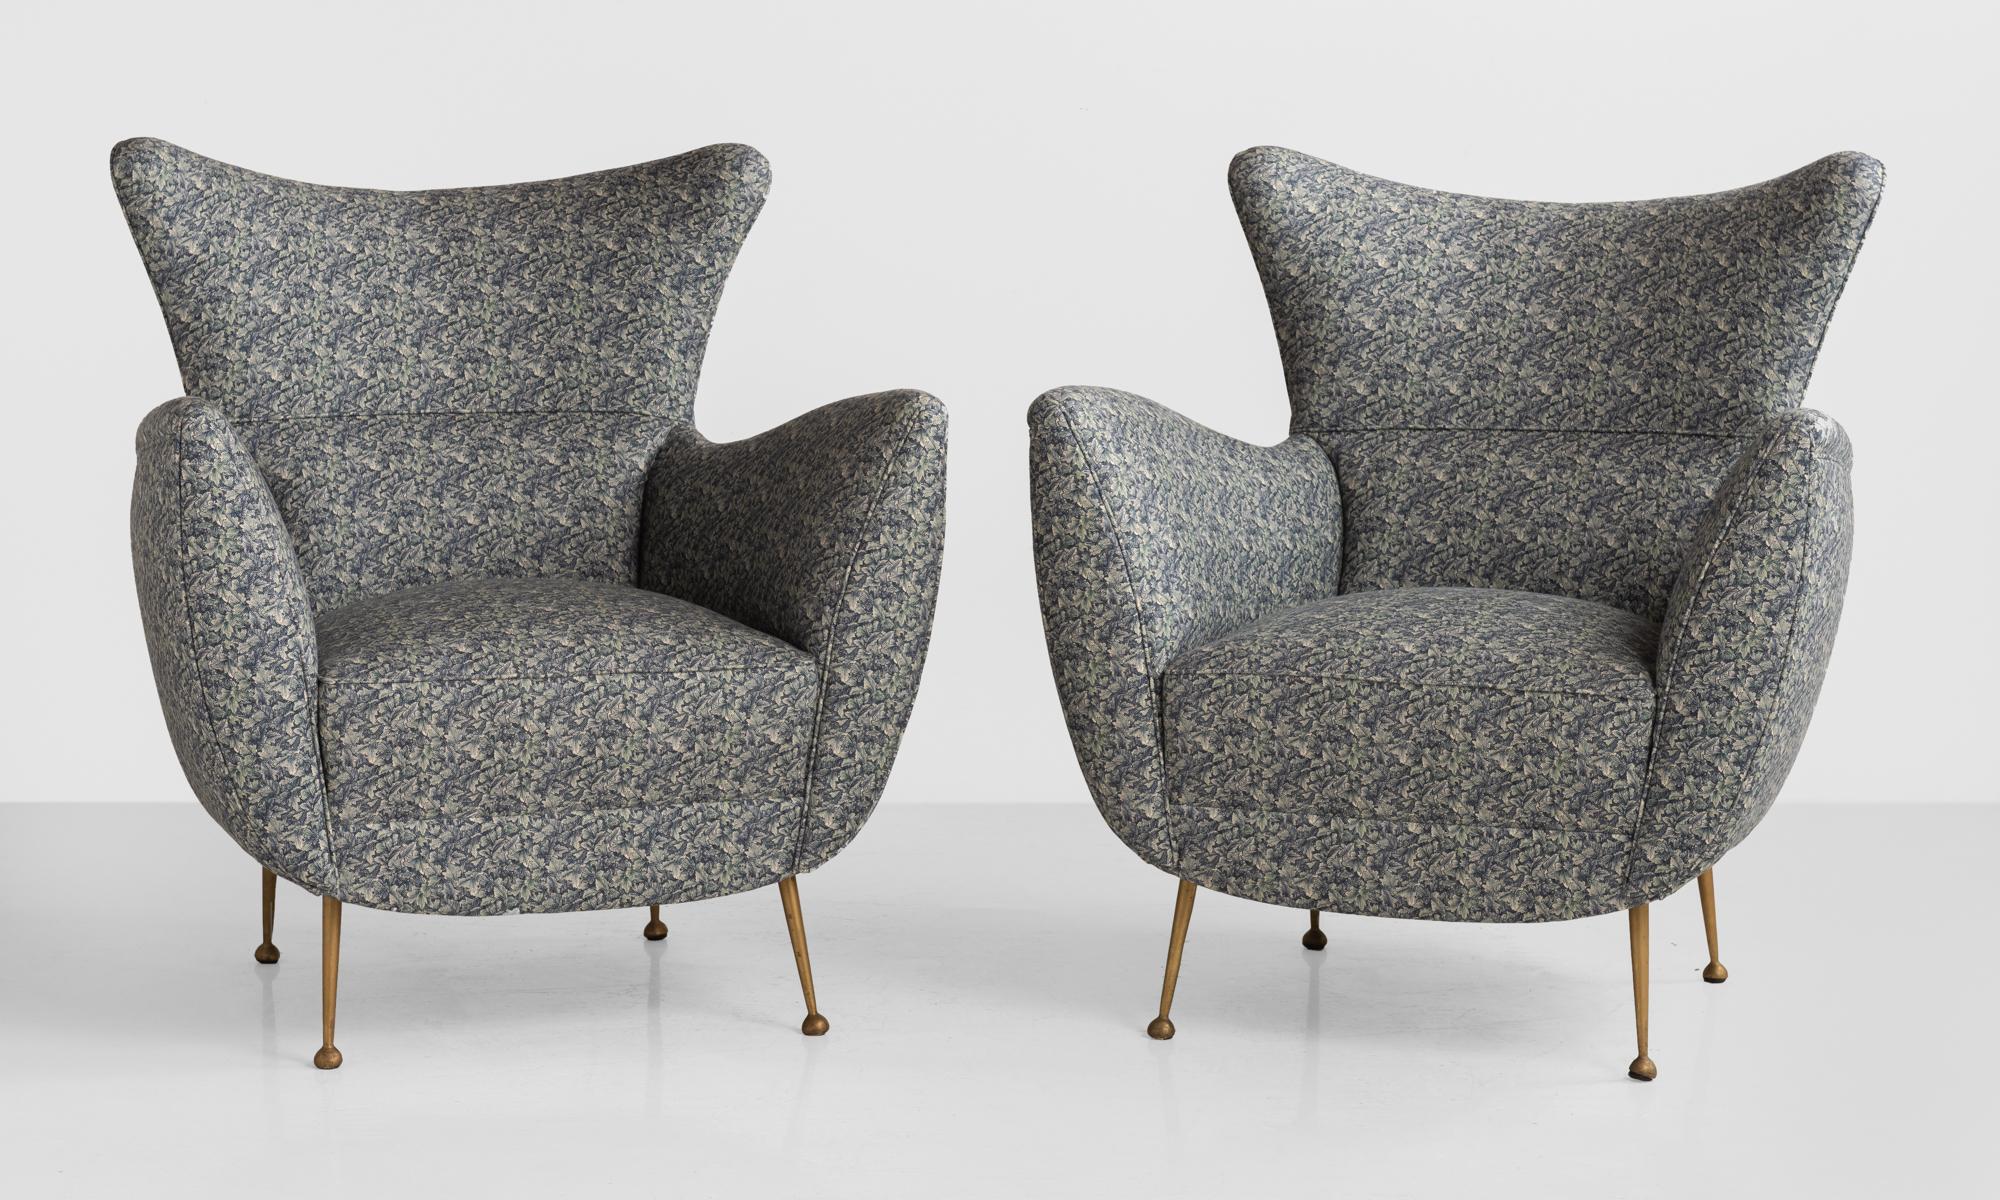 Pair of modern armchairs, circa 1950

Curved back and sloping arms on brass legs. Newly upholstered in liberty of London fabric.